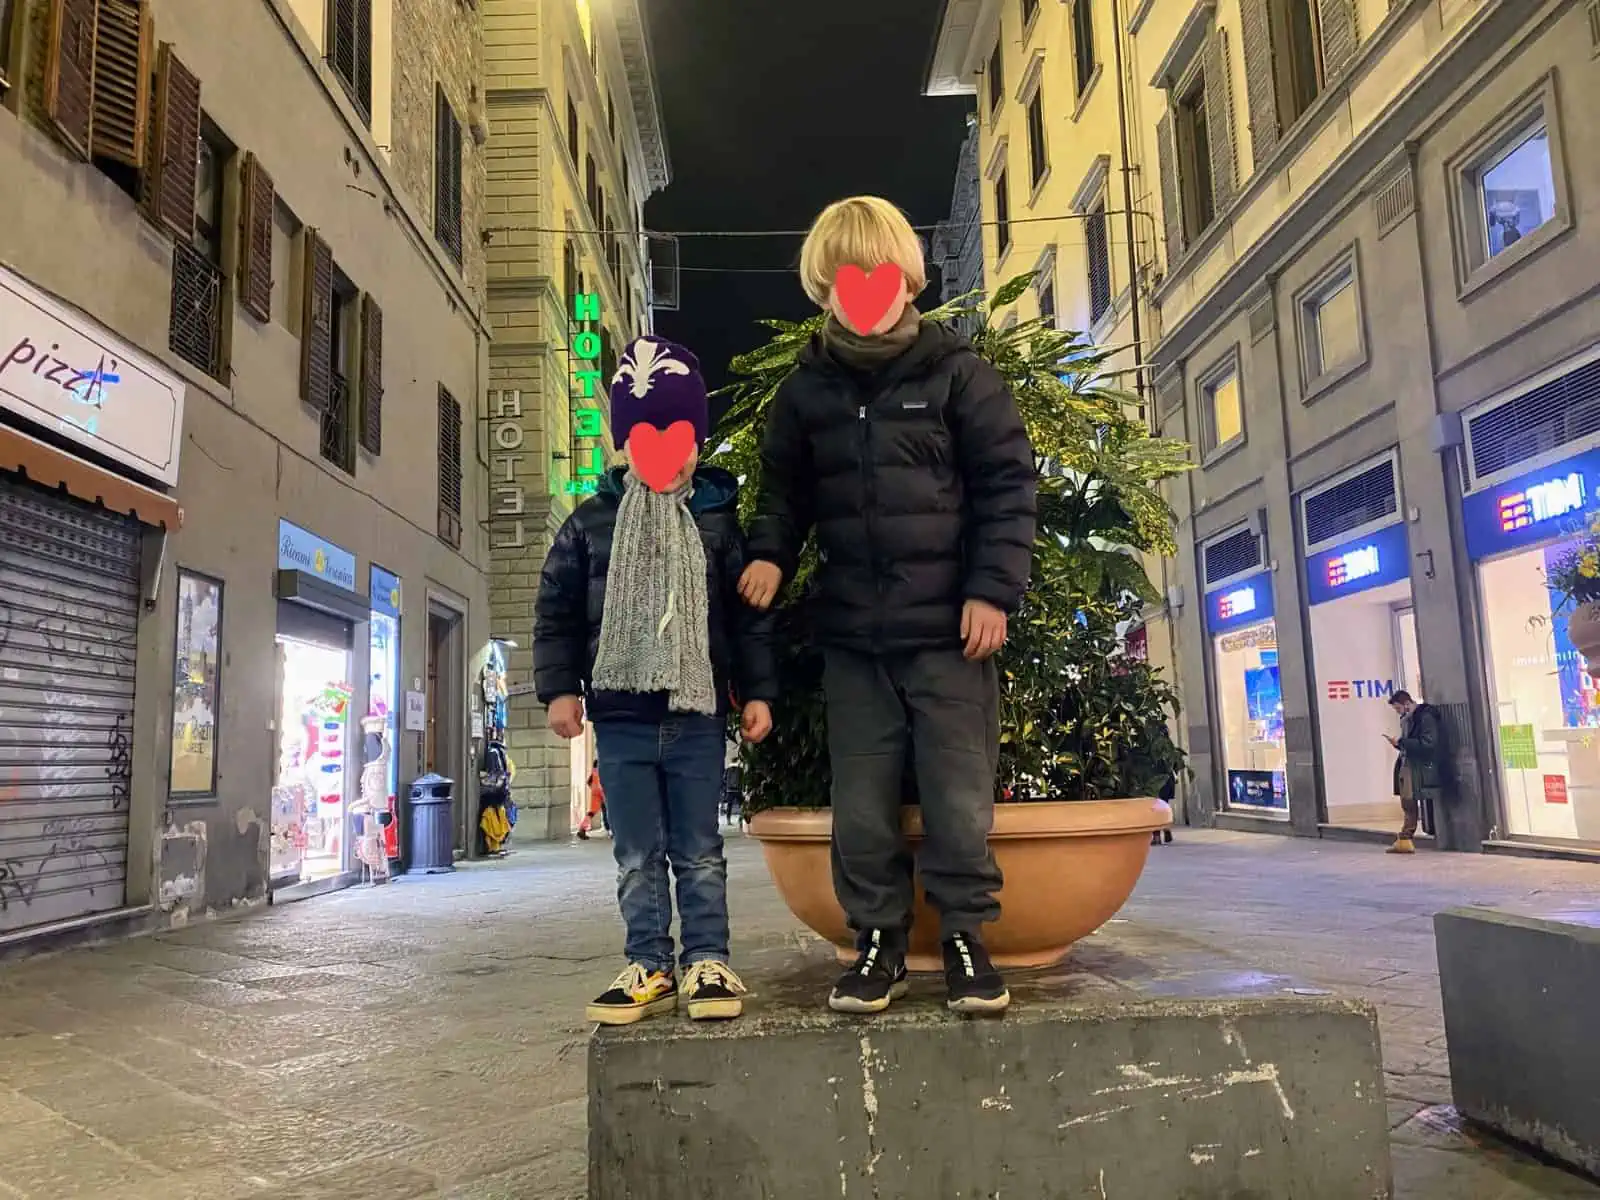 Boys standing on stone block in middle of road in Florence, Italy. You can see closed shops on either side. It's night. They're wearing winter clothing.